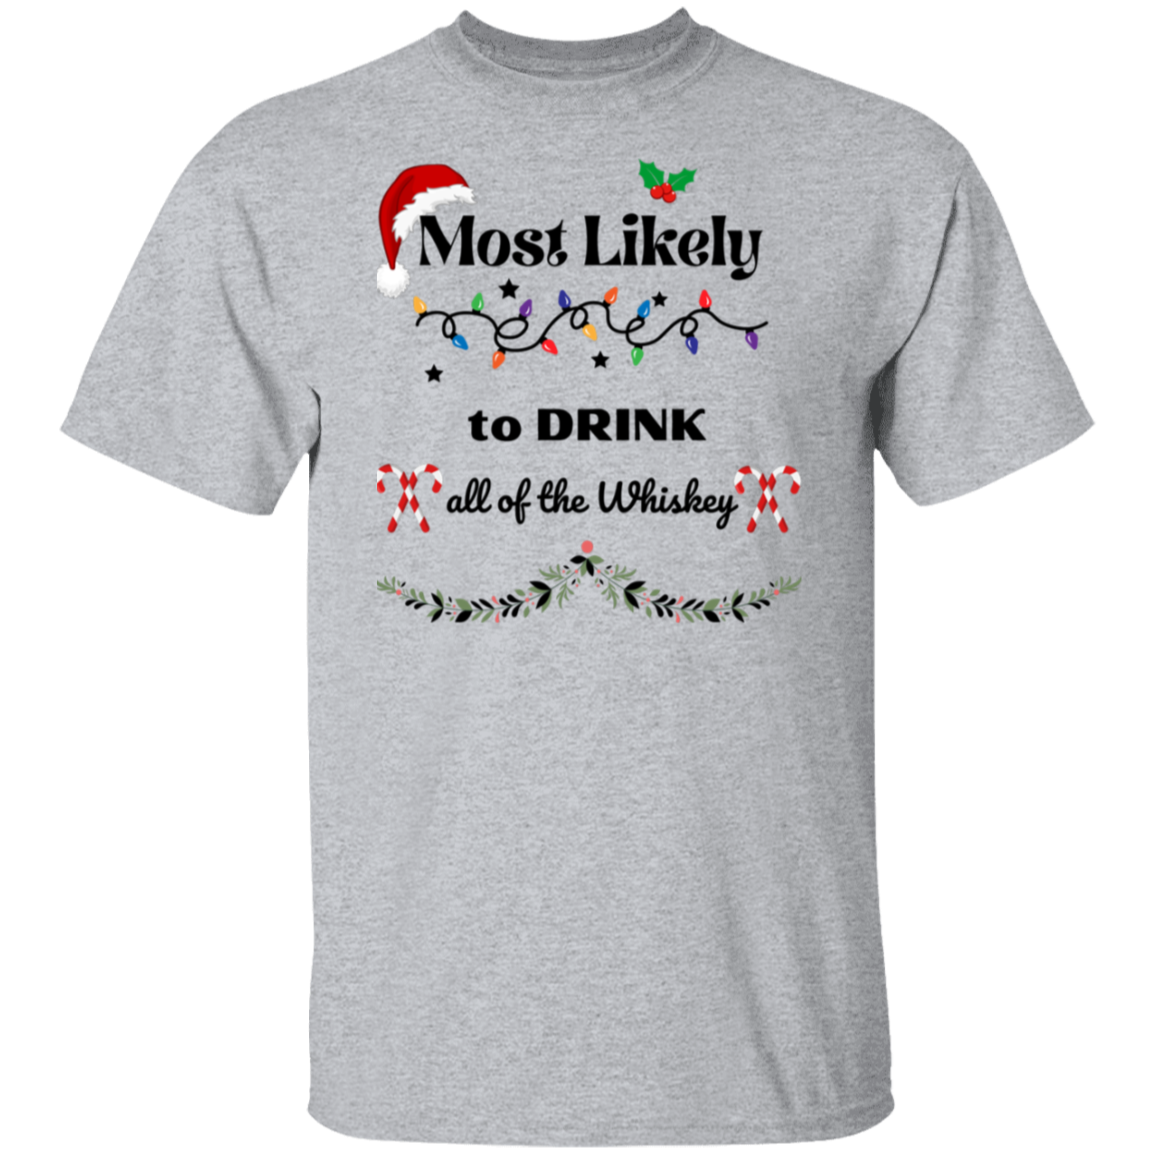 Most Likely  T-Shirt Holiday cheer!